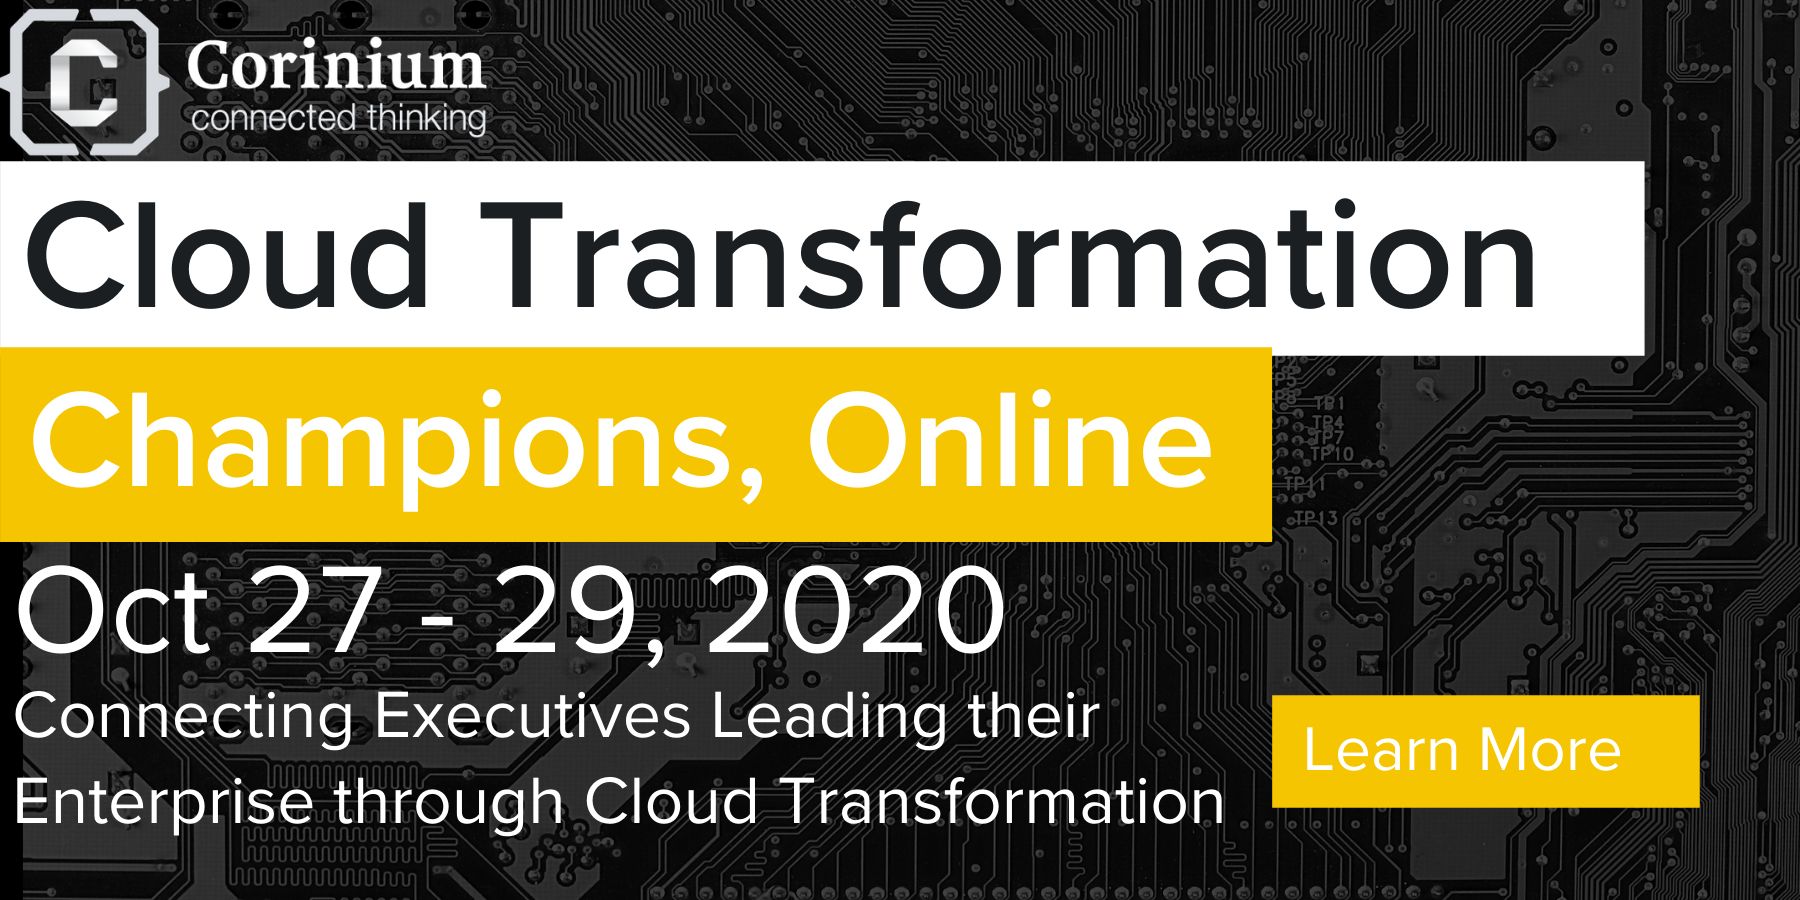 Cloud Transformation Champions, Online, Online, United States